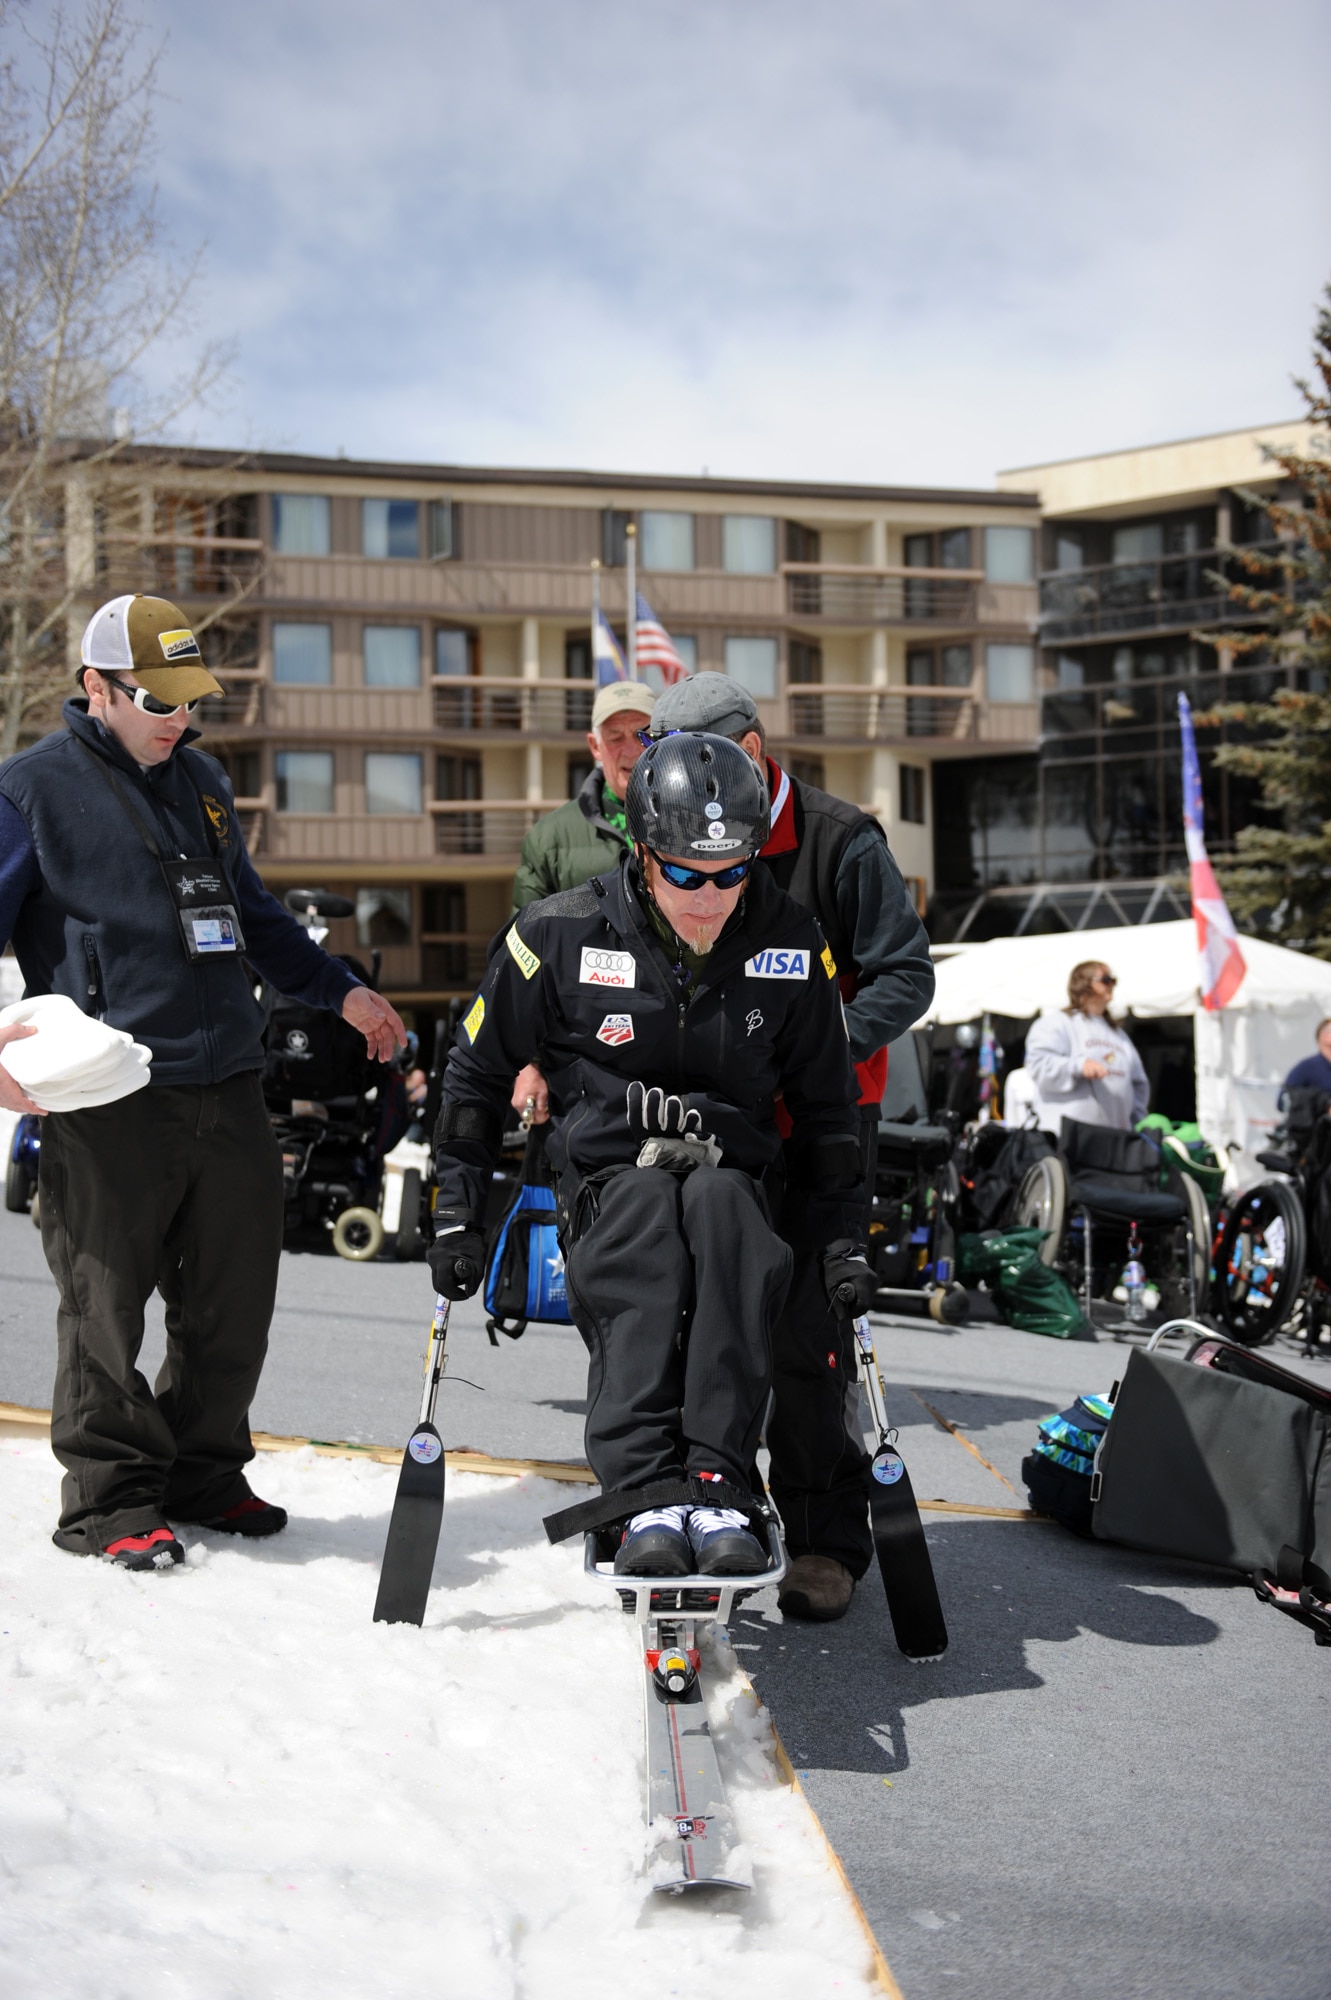 Sean Halsted gets strapped into a mono-ski outside The Silvertree Hotel March 30 for the 24th National Disabled American Veterans Winter Sports Clinic in Snowmass Village, Colo. Halsted is an Air Force veteran who will be competing in the 2014 Sochi Paralympic Winter Games. (U.S. Air Force photo/Desiree N. Palacios)
